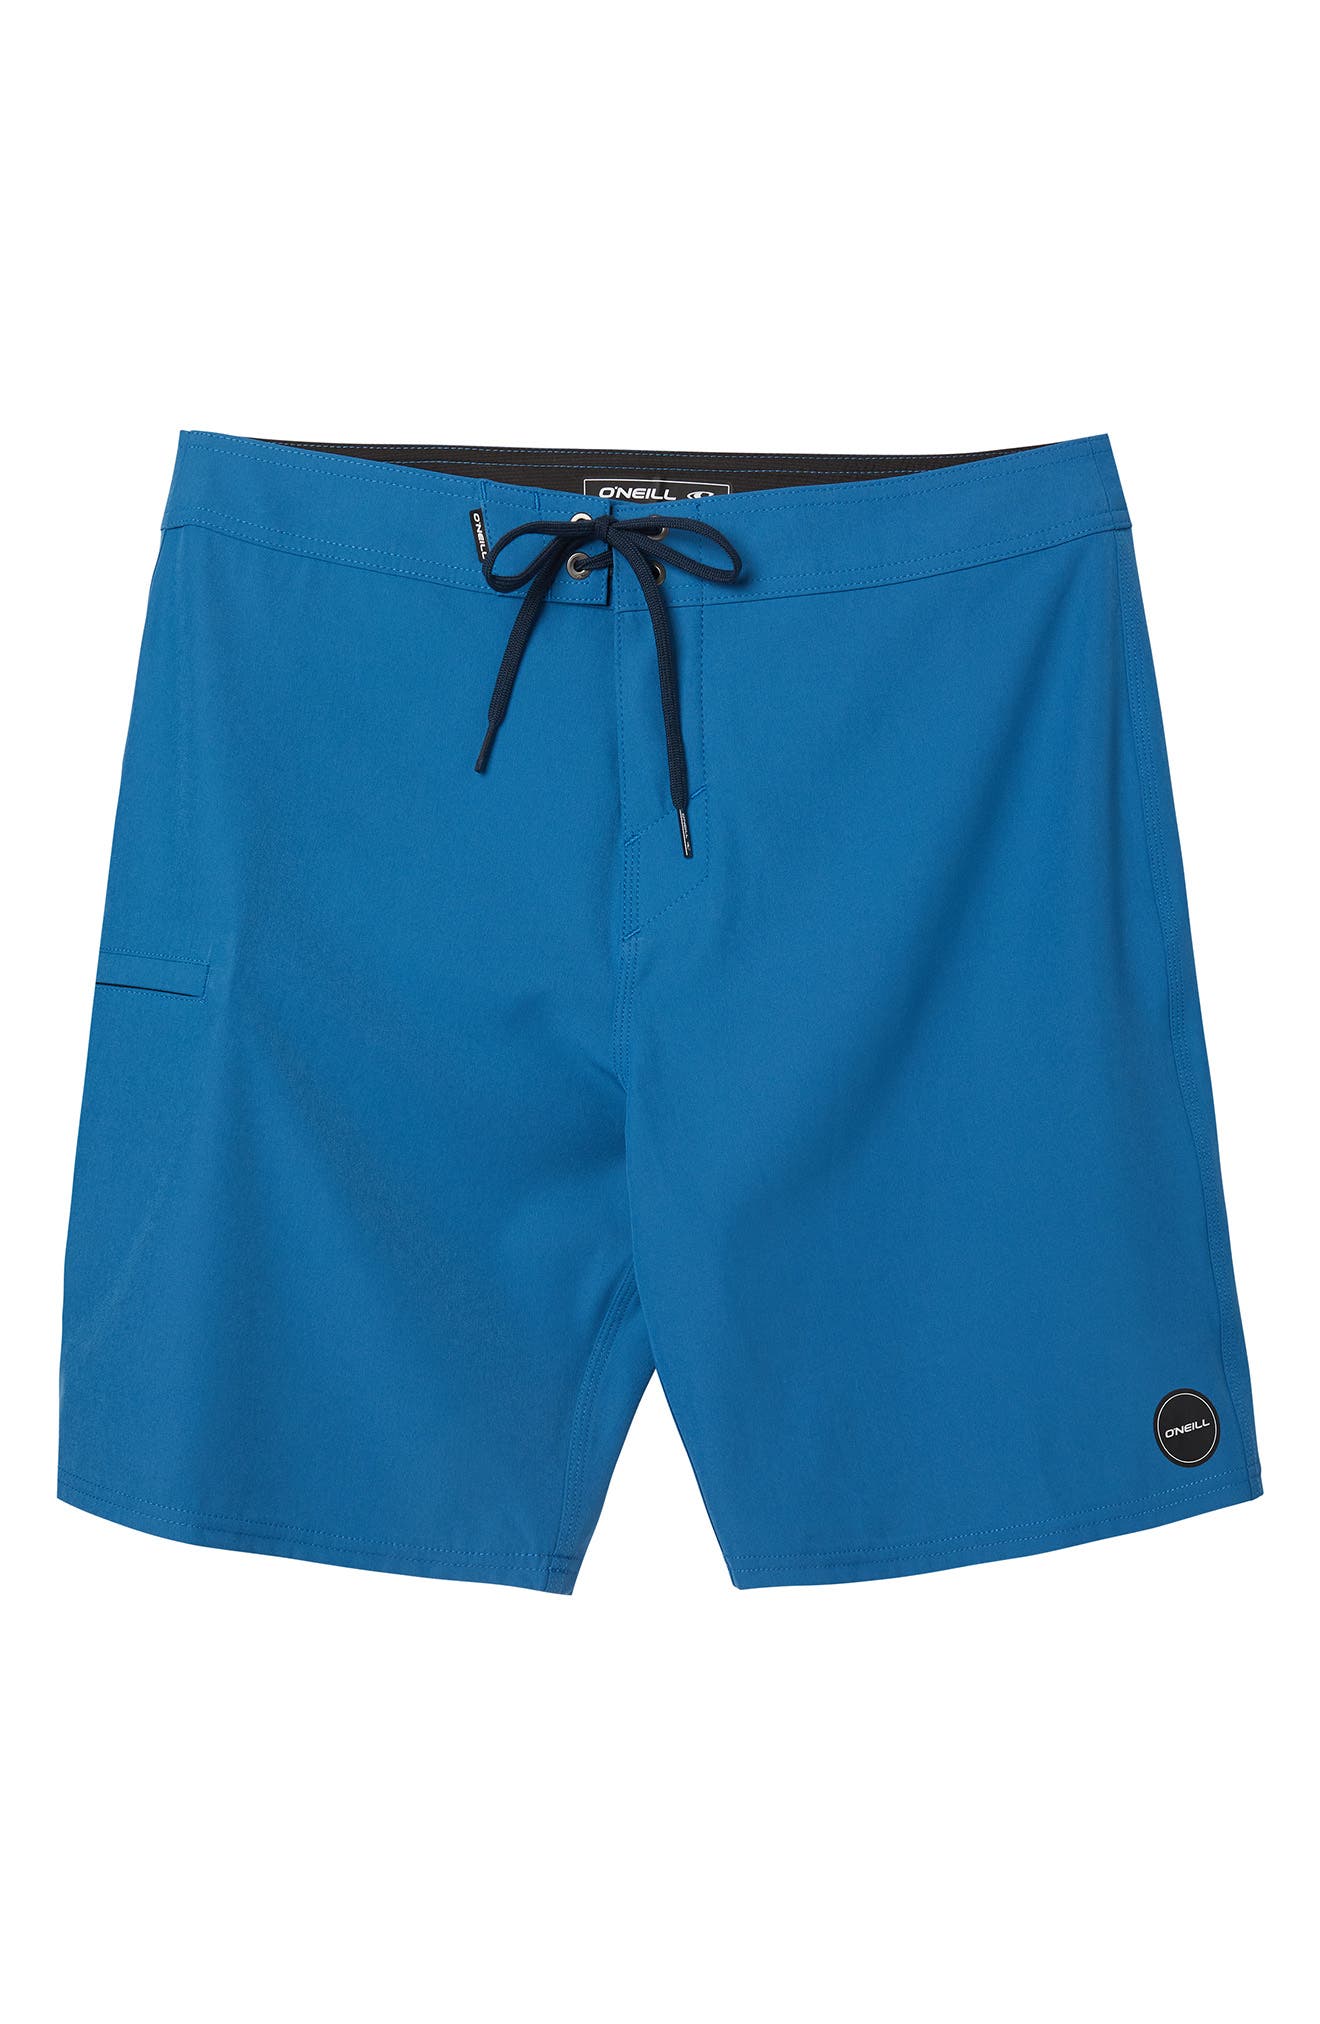 Details about   Speedo Infant Boys Swimming Trunks Age 9-12 months  NEW WITH TAGS* FREEPOST * 